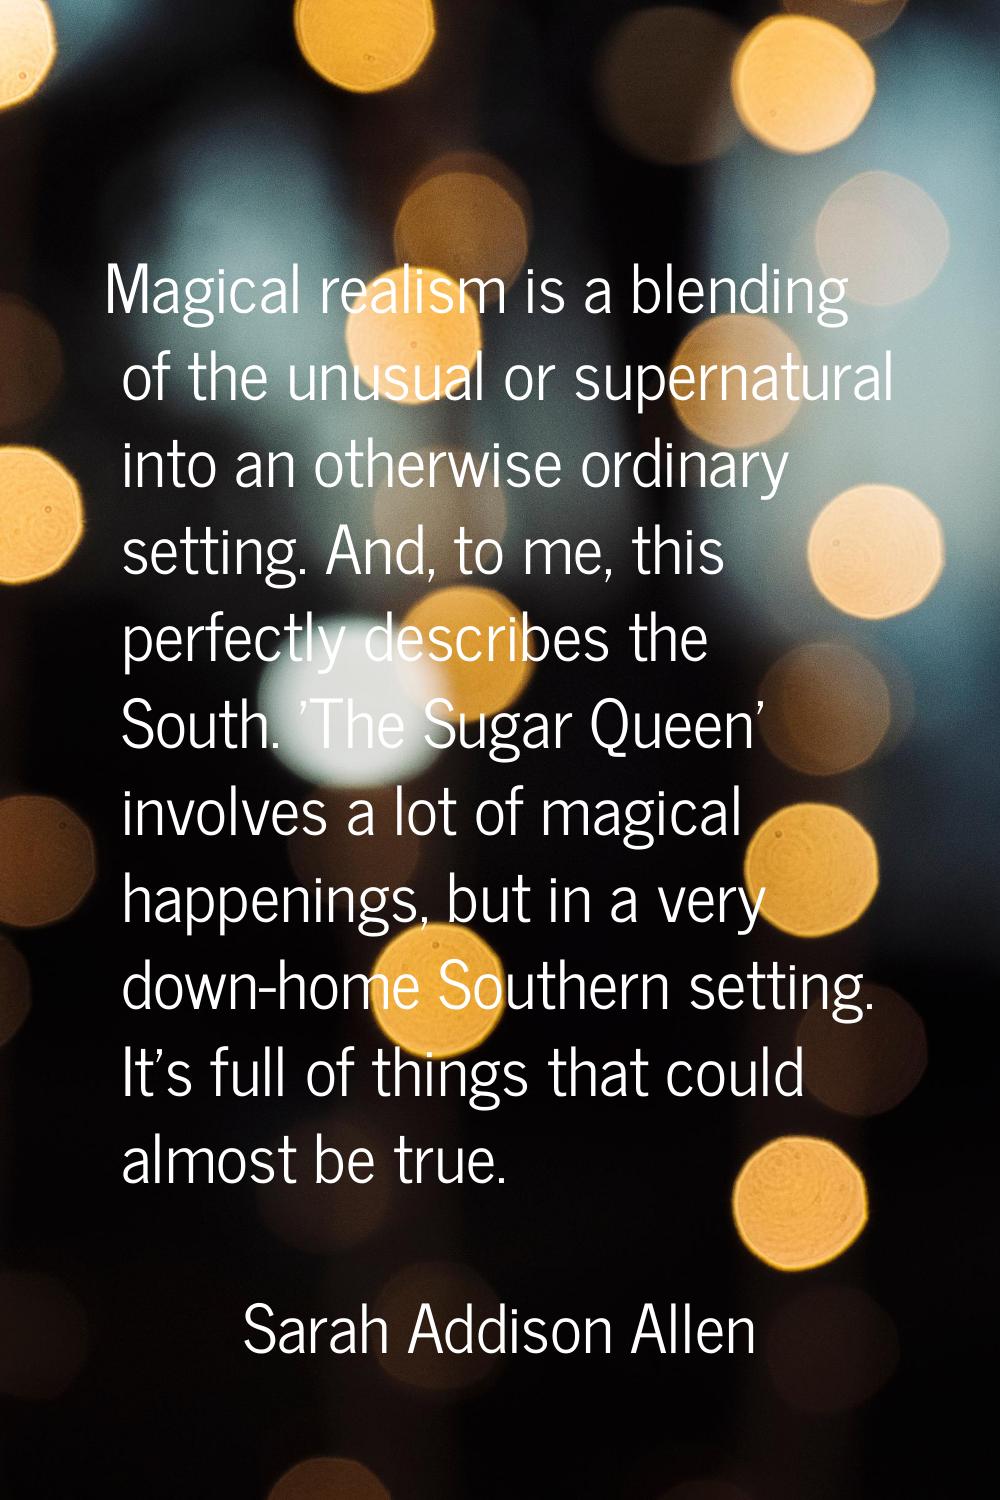 Magical realism is a blending of the unusual or supernatural into an otherwise ordinary setting. An